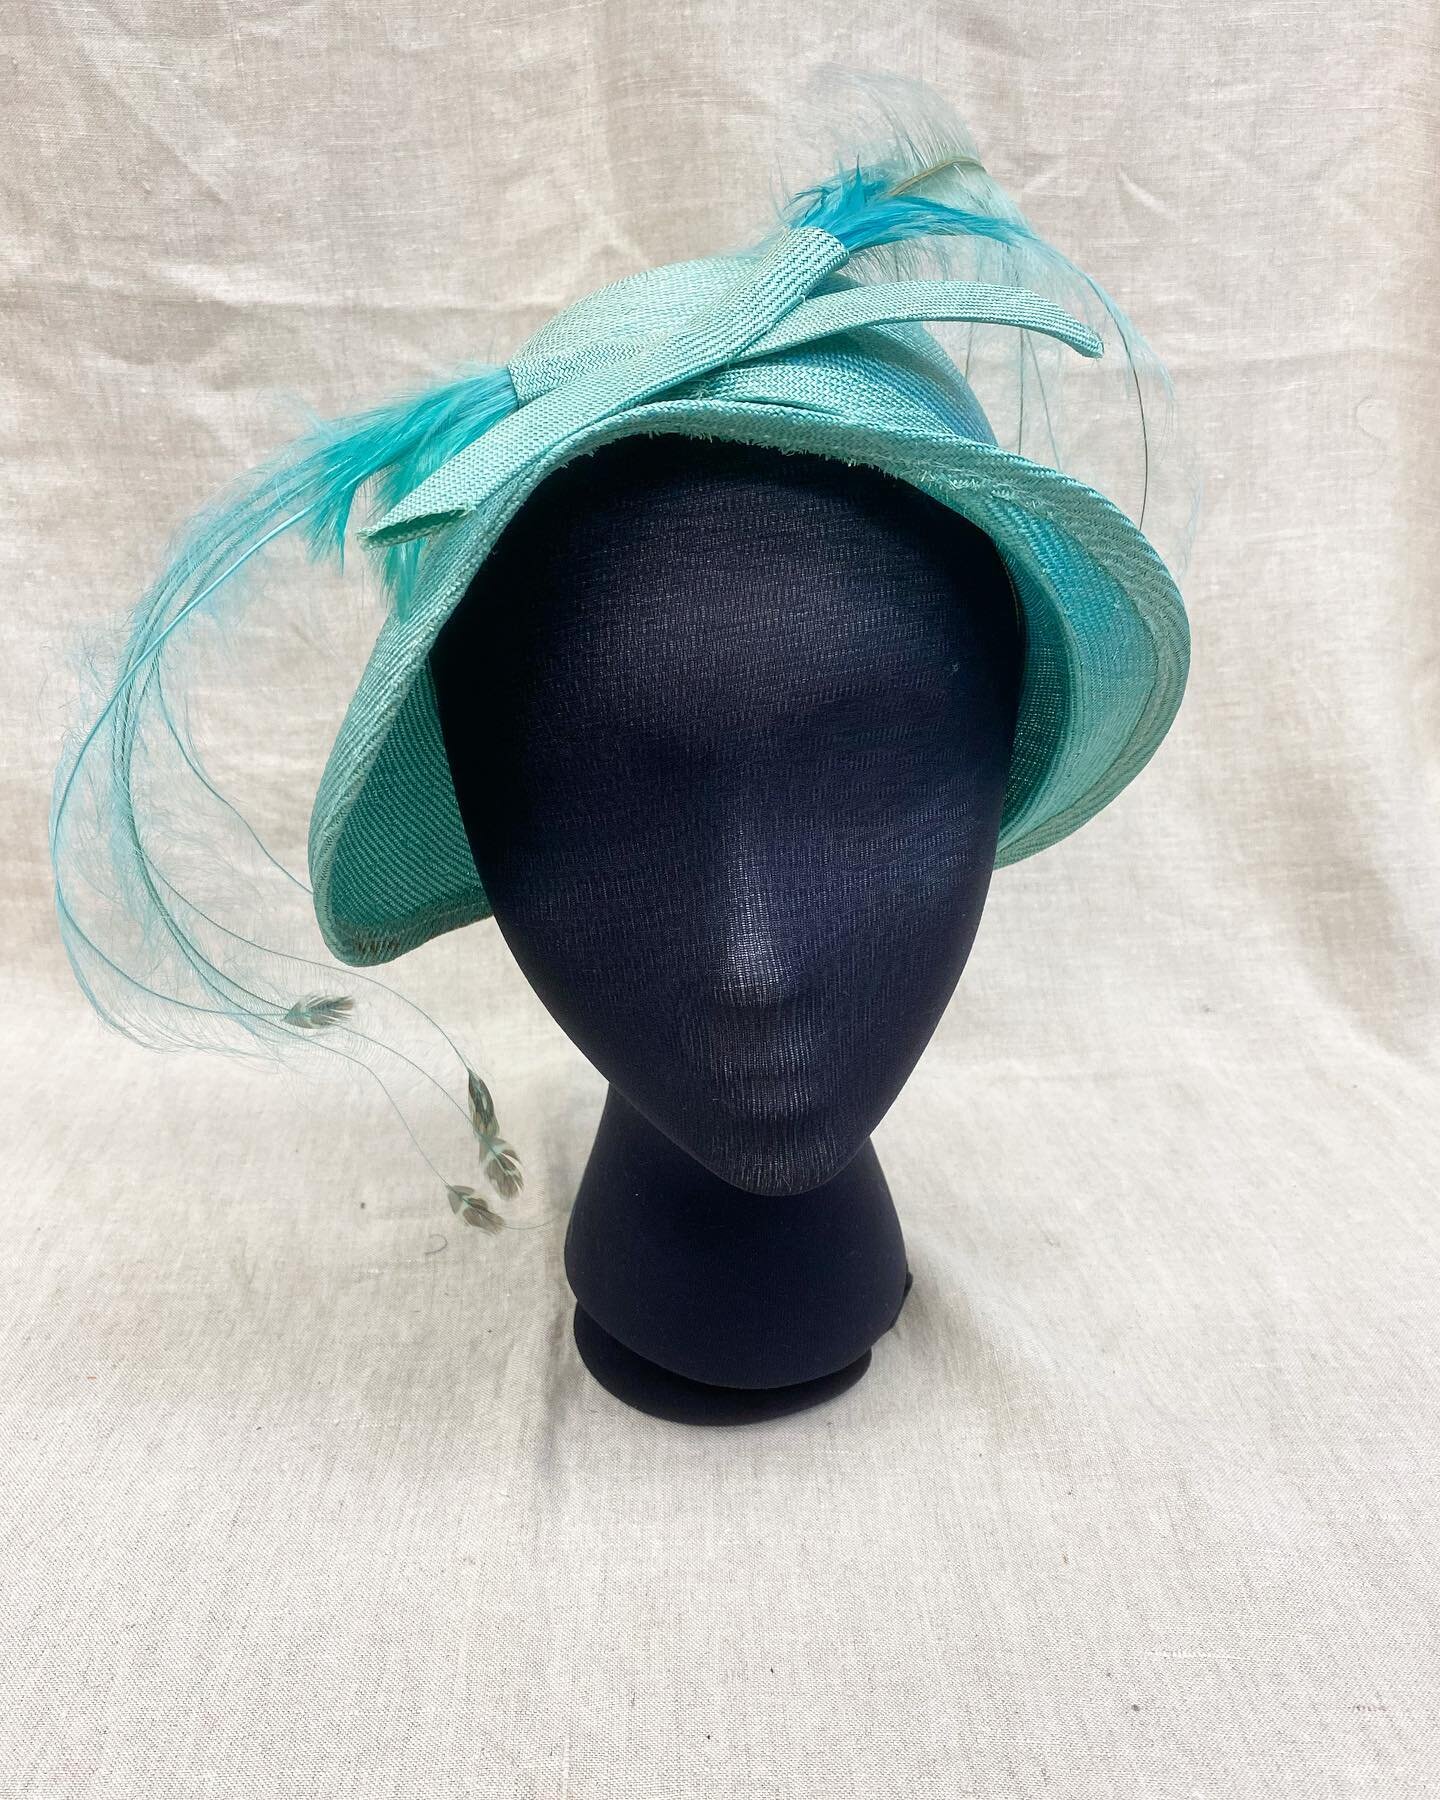 Sometimes Mondays come and we get wrapped up in the day instead of focusing on the important things, like HATS. Though our millinery minds were elsewhere yesterday, they are raring to go today! 

This hat is a staff favorite, we love the bright color